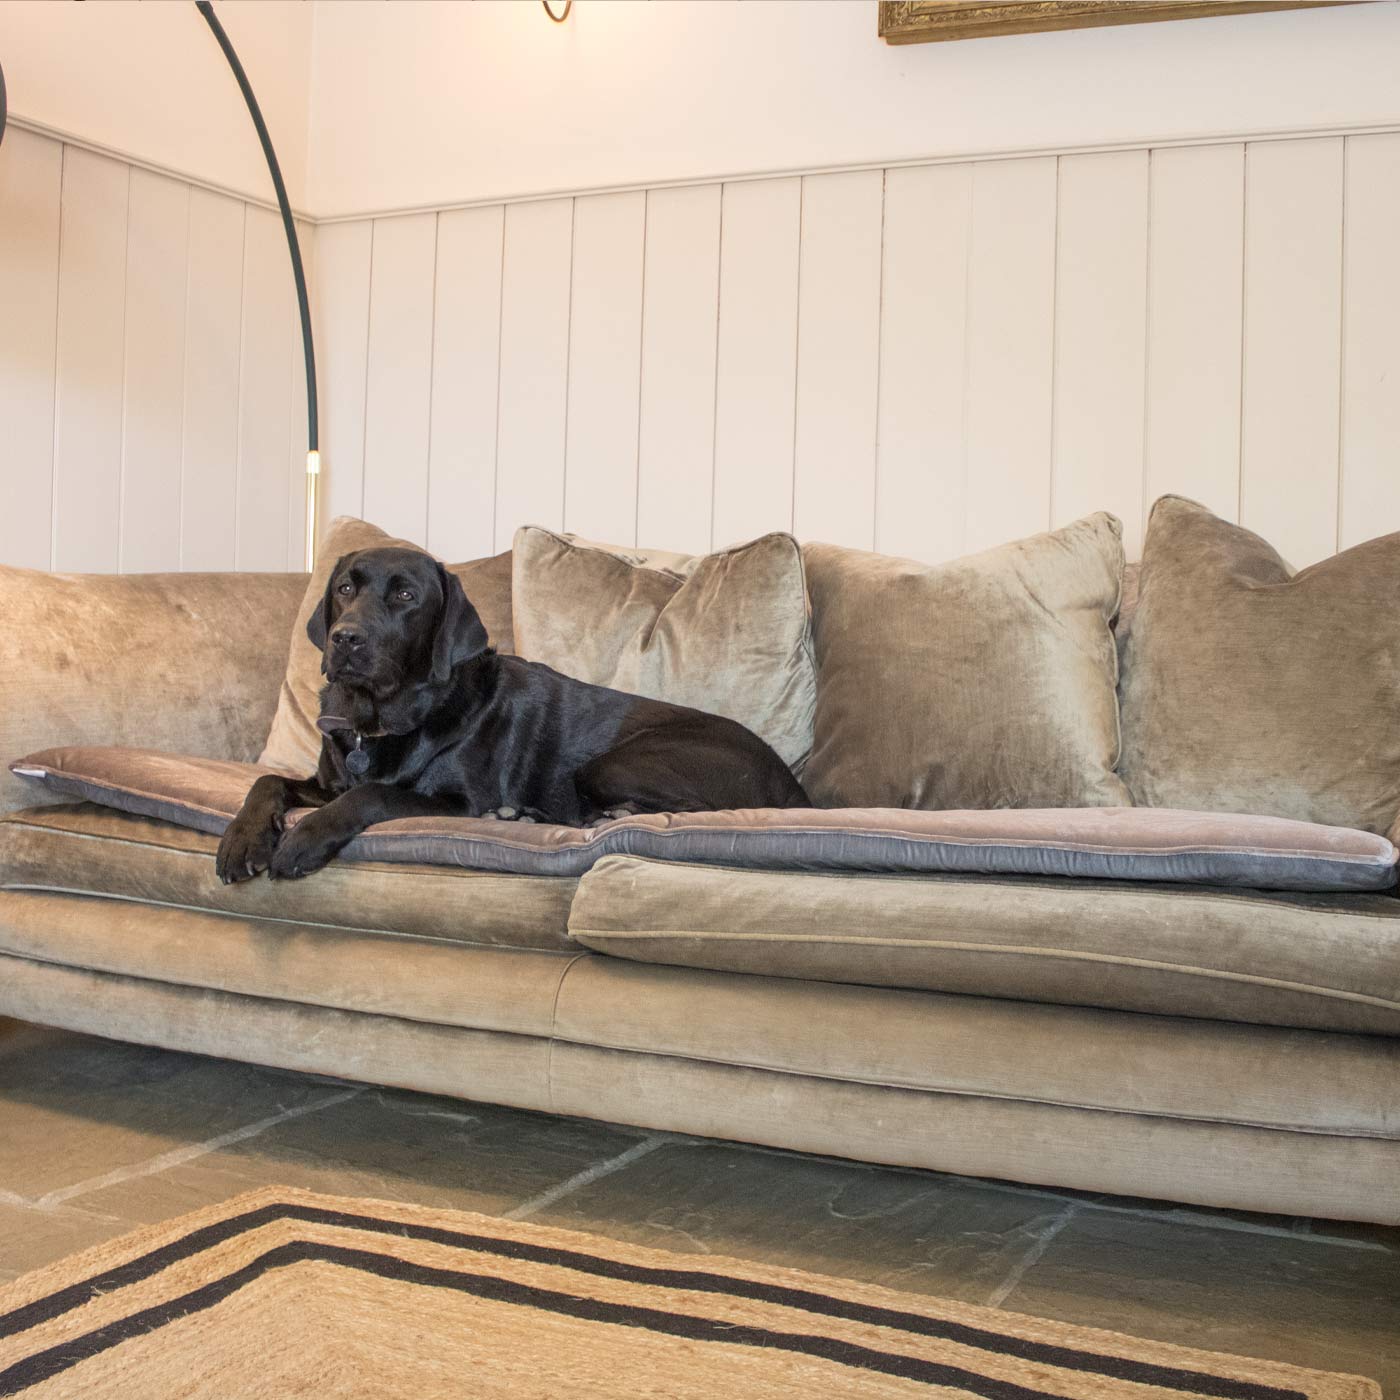 [color:mink velvet] Discover Our Luxury Velvet Couch Topper, The Perfect Pet Couch Accessory In Stunning Mink Velvet ! Available Now at Lords & Labradors US